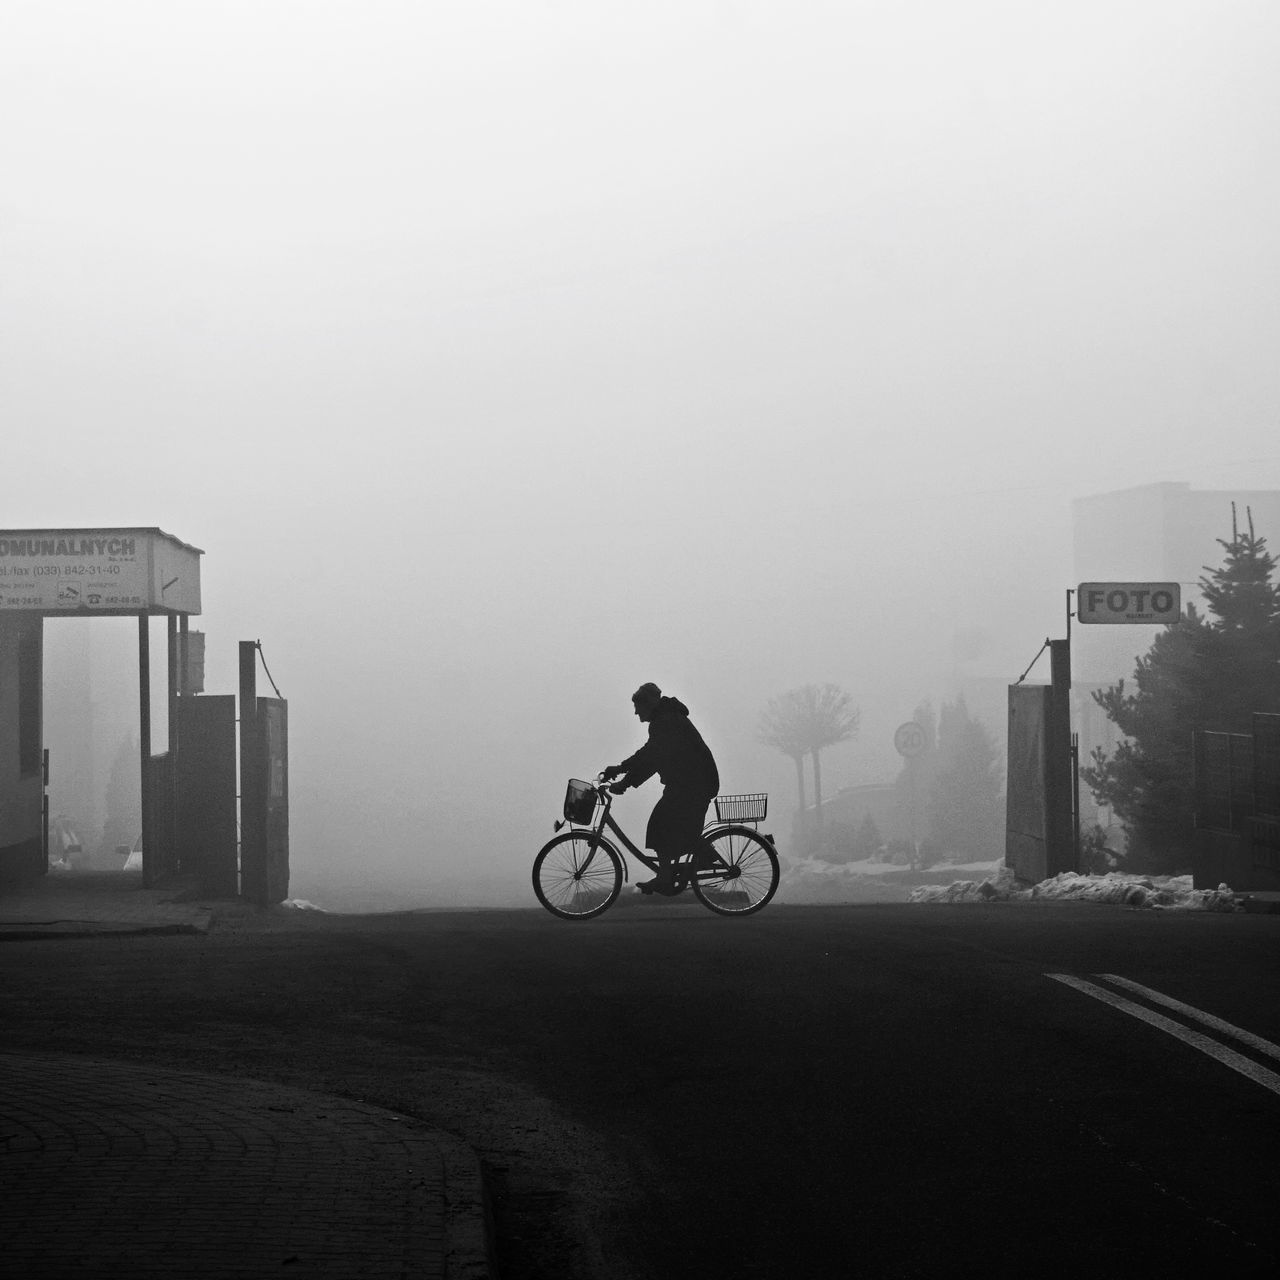 MAN RIDING BICYCLE ON ROAD IN CITY AGAINST SKY